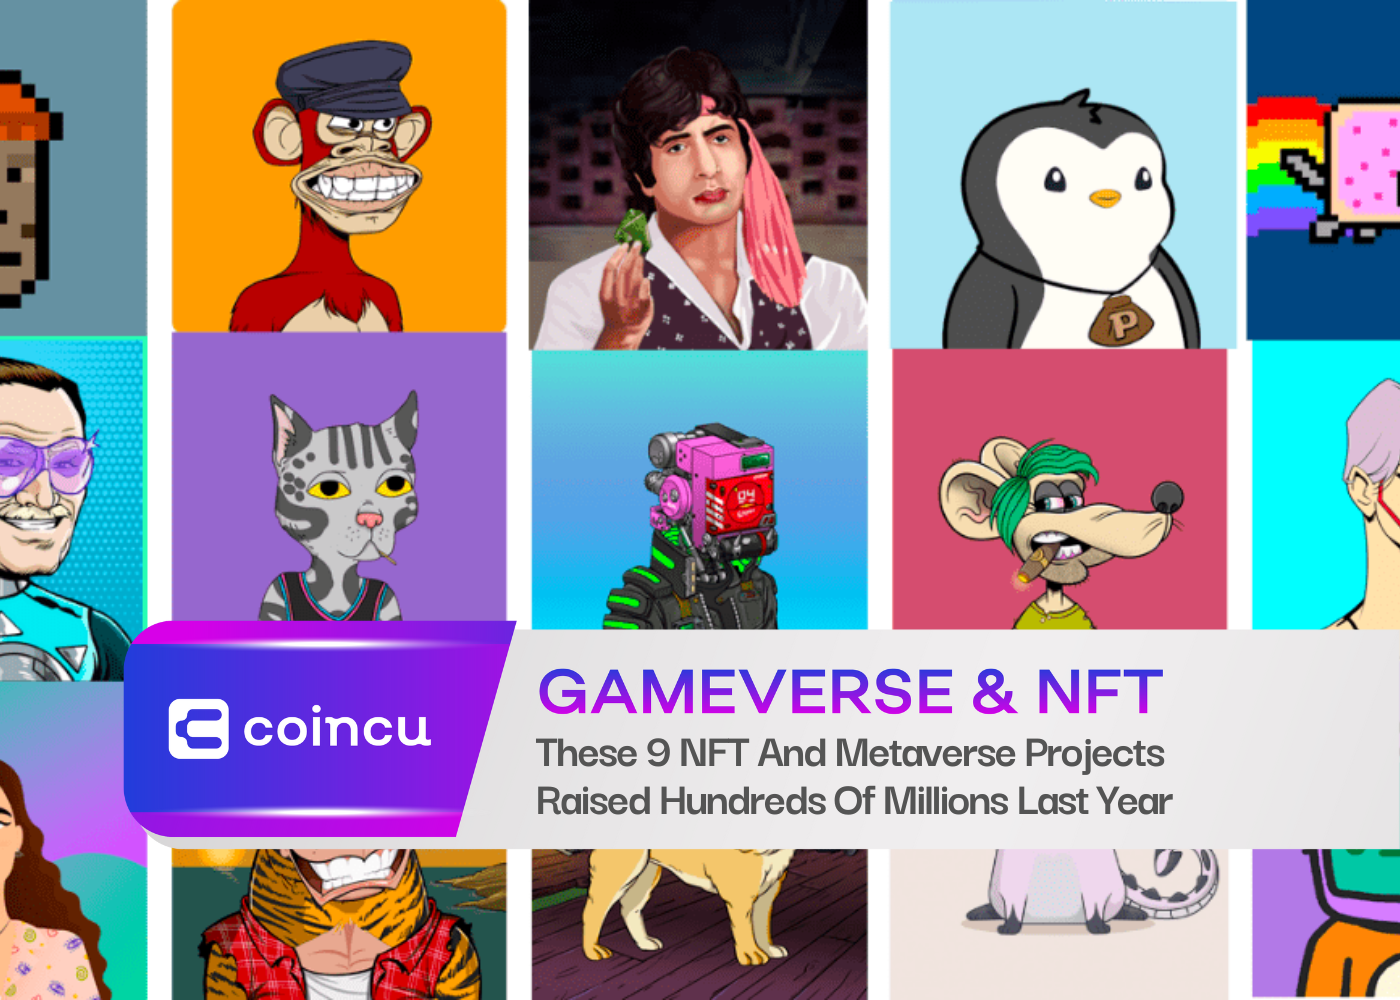 These 9 NFT And Metaverse Projects Raised Hundreds Of Millions Last Year